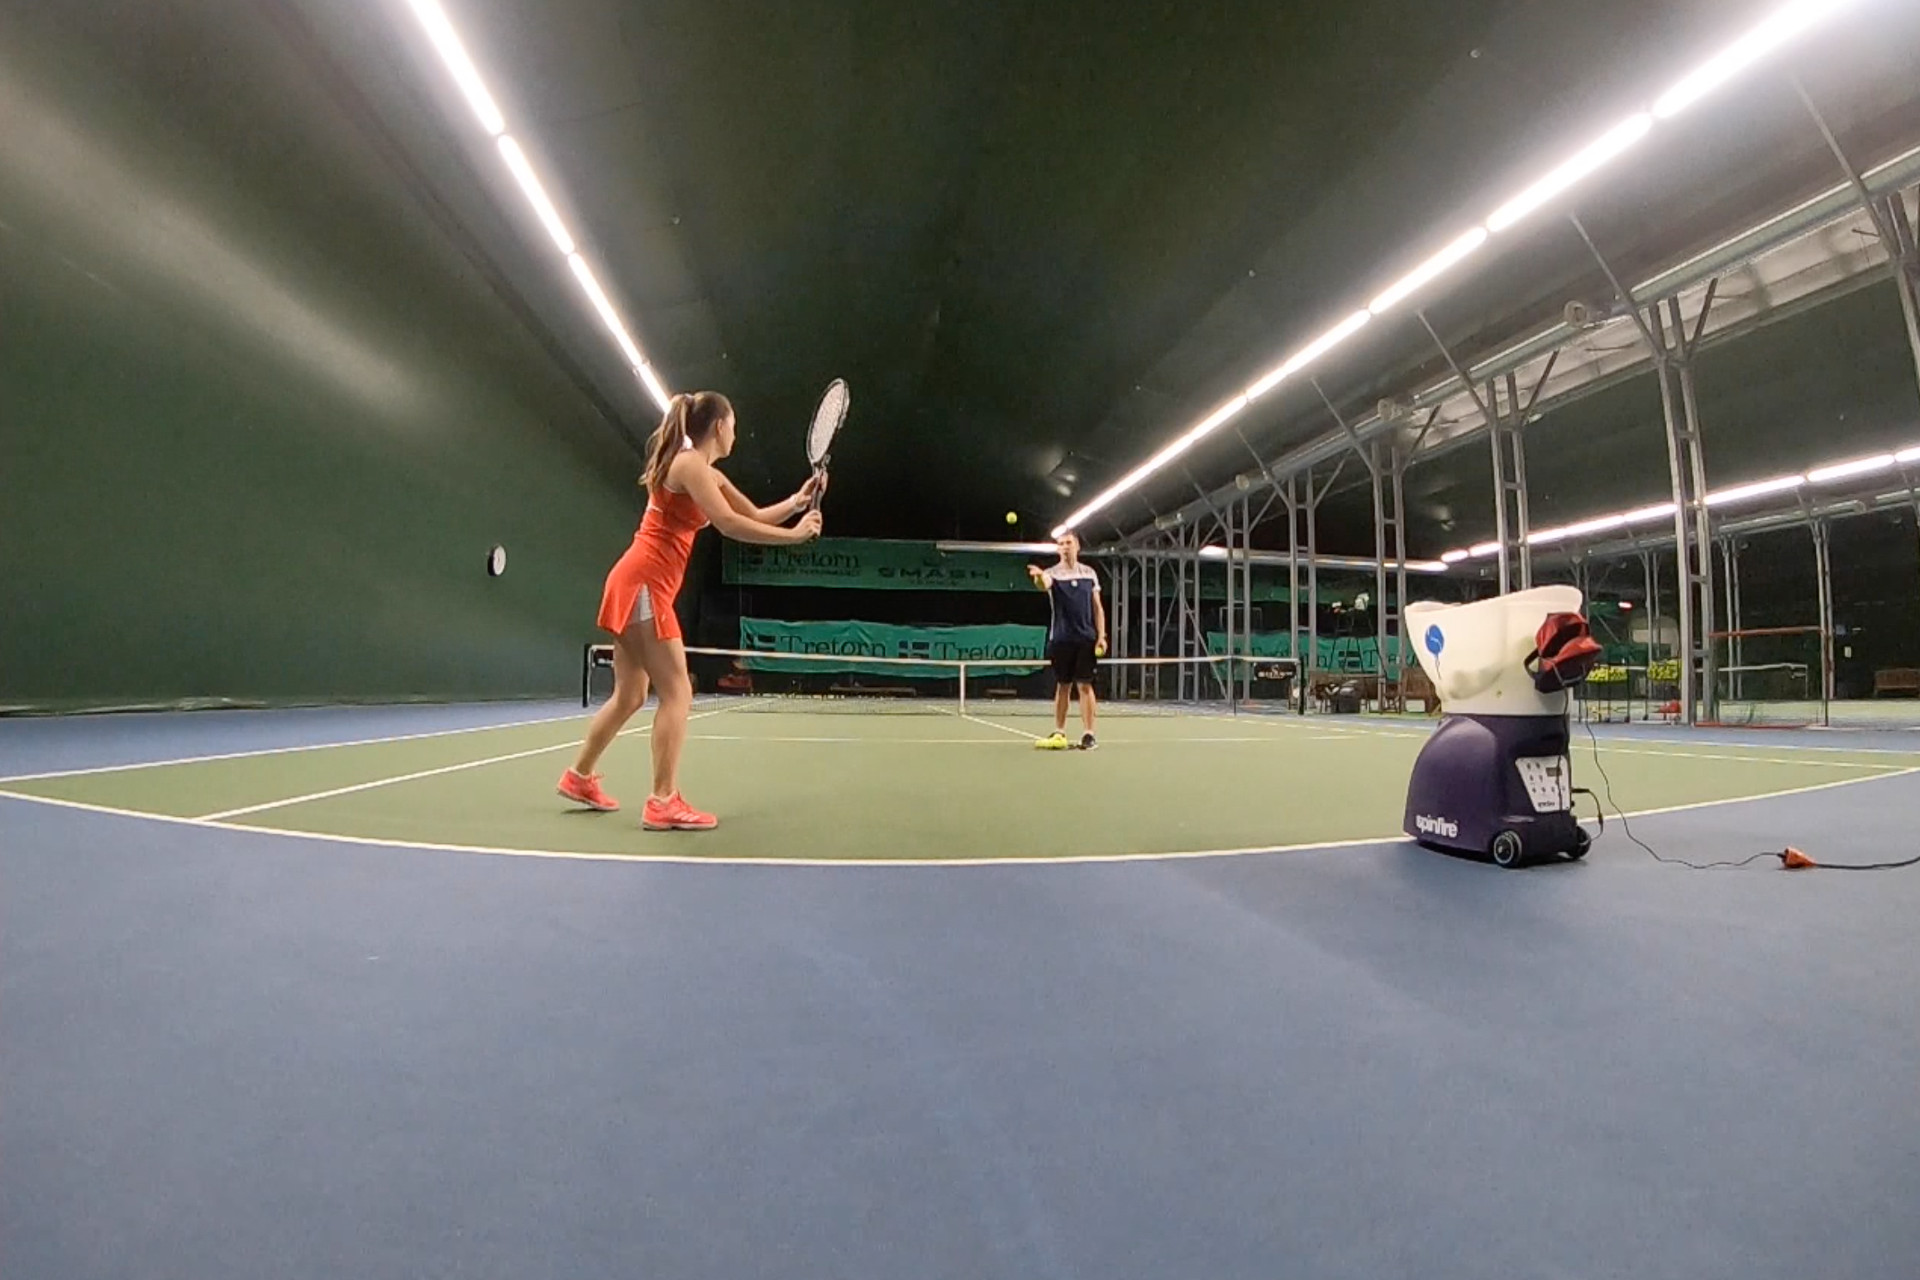 Elena practicing a shorter backswing in the forehand